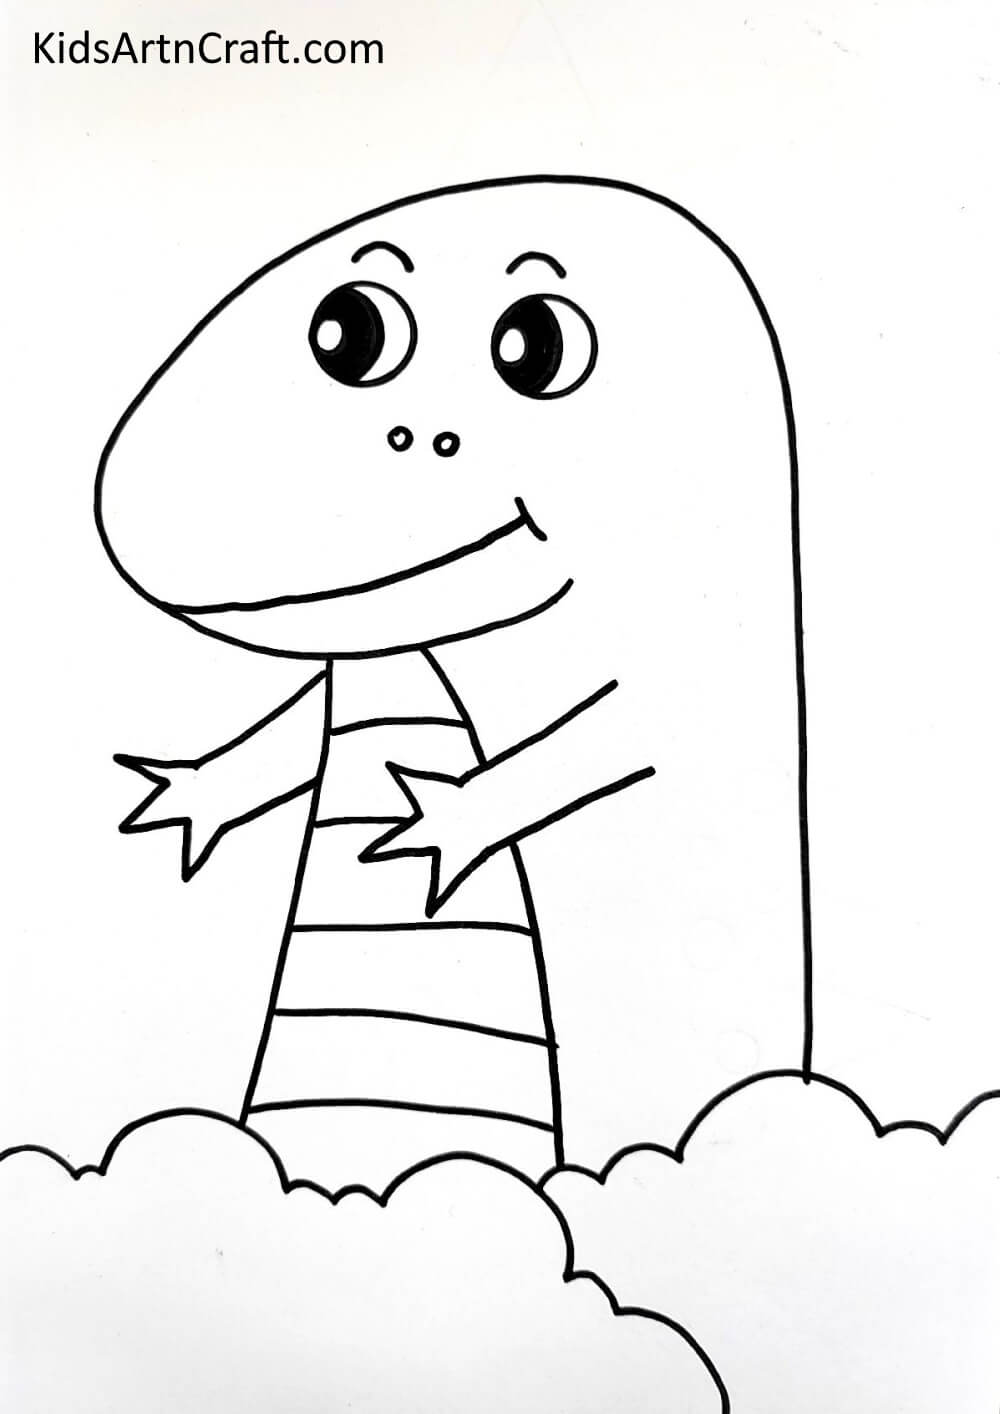 Drawing The Face And Hands - Pick Up the Skills to Create a Dinosaur Easy Instructions